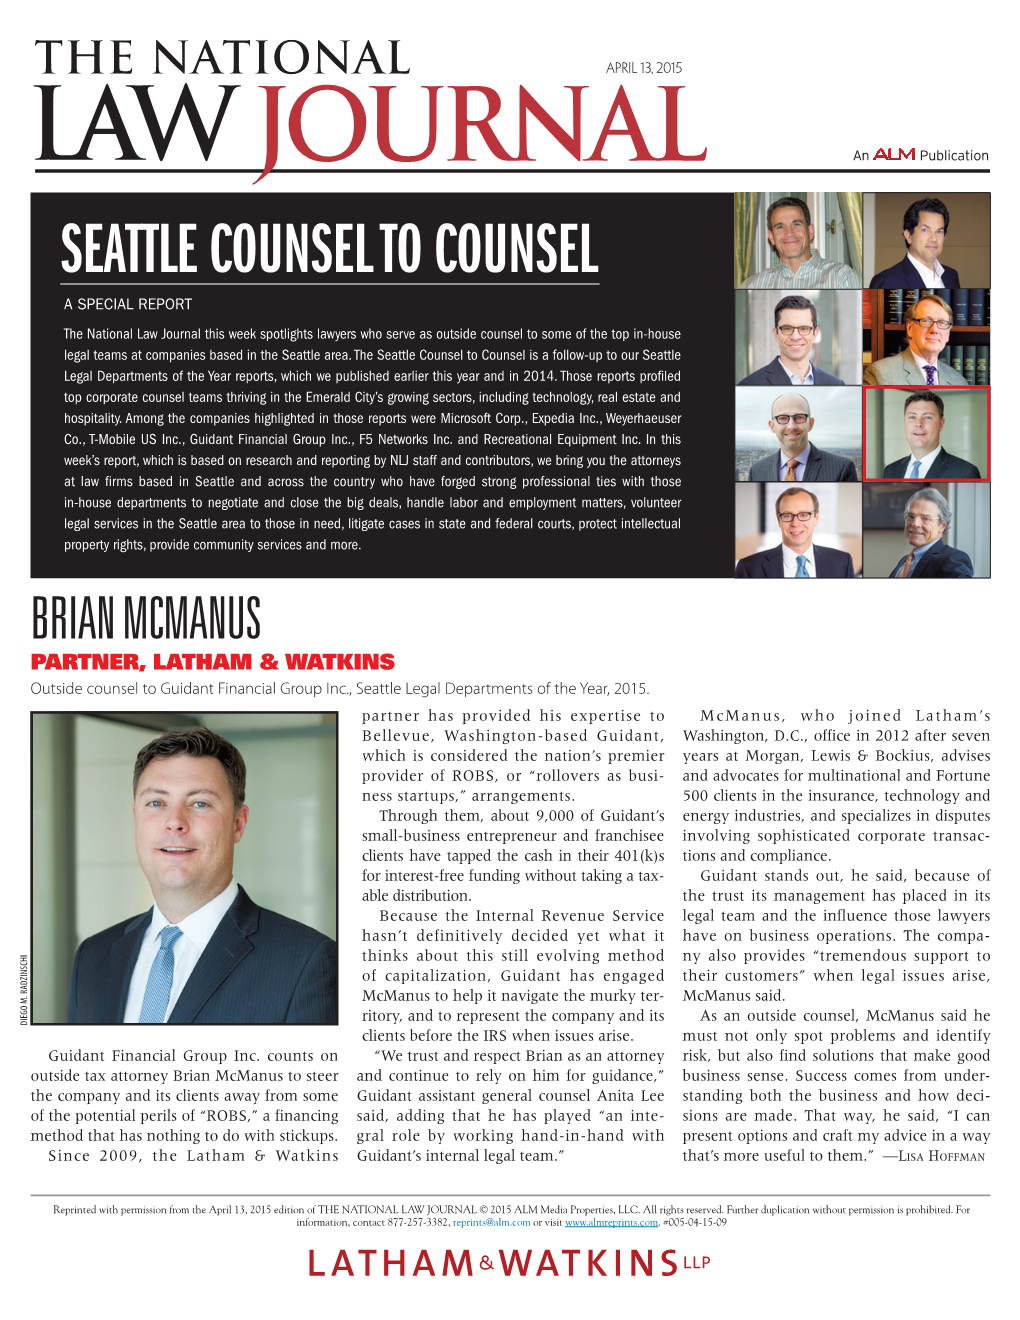 Seattle Counsel to Counsel: Brian Mcmanus